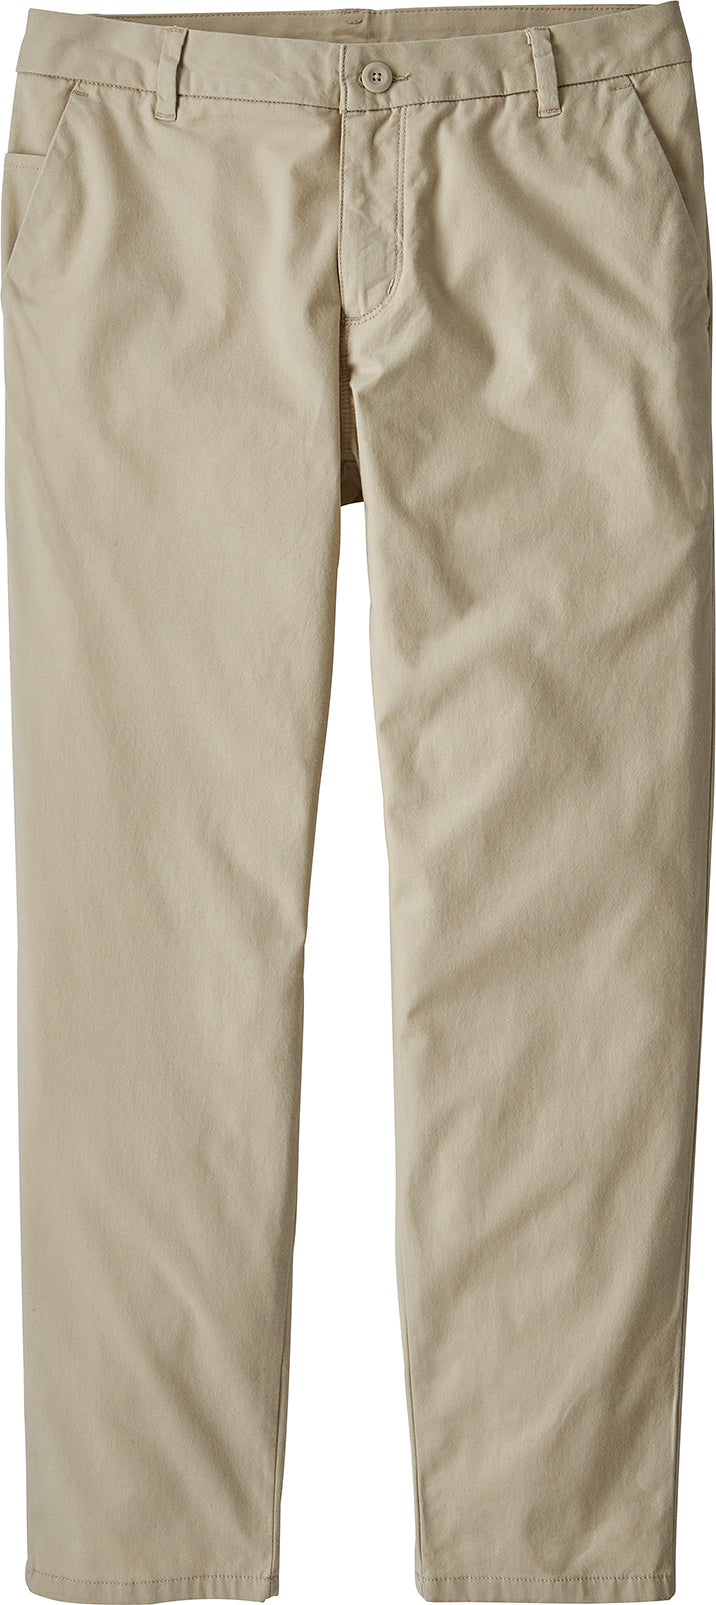 Patagonia Stretch All - Wear Cropped Pants - Women's